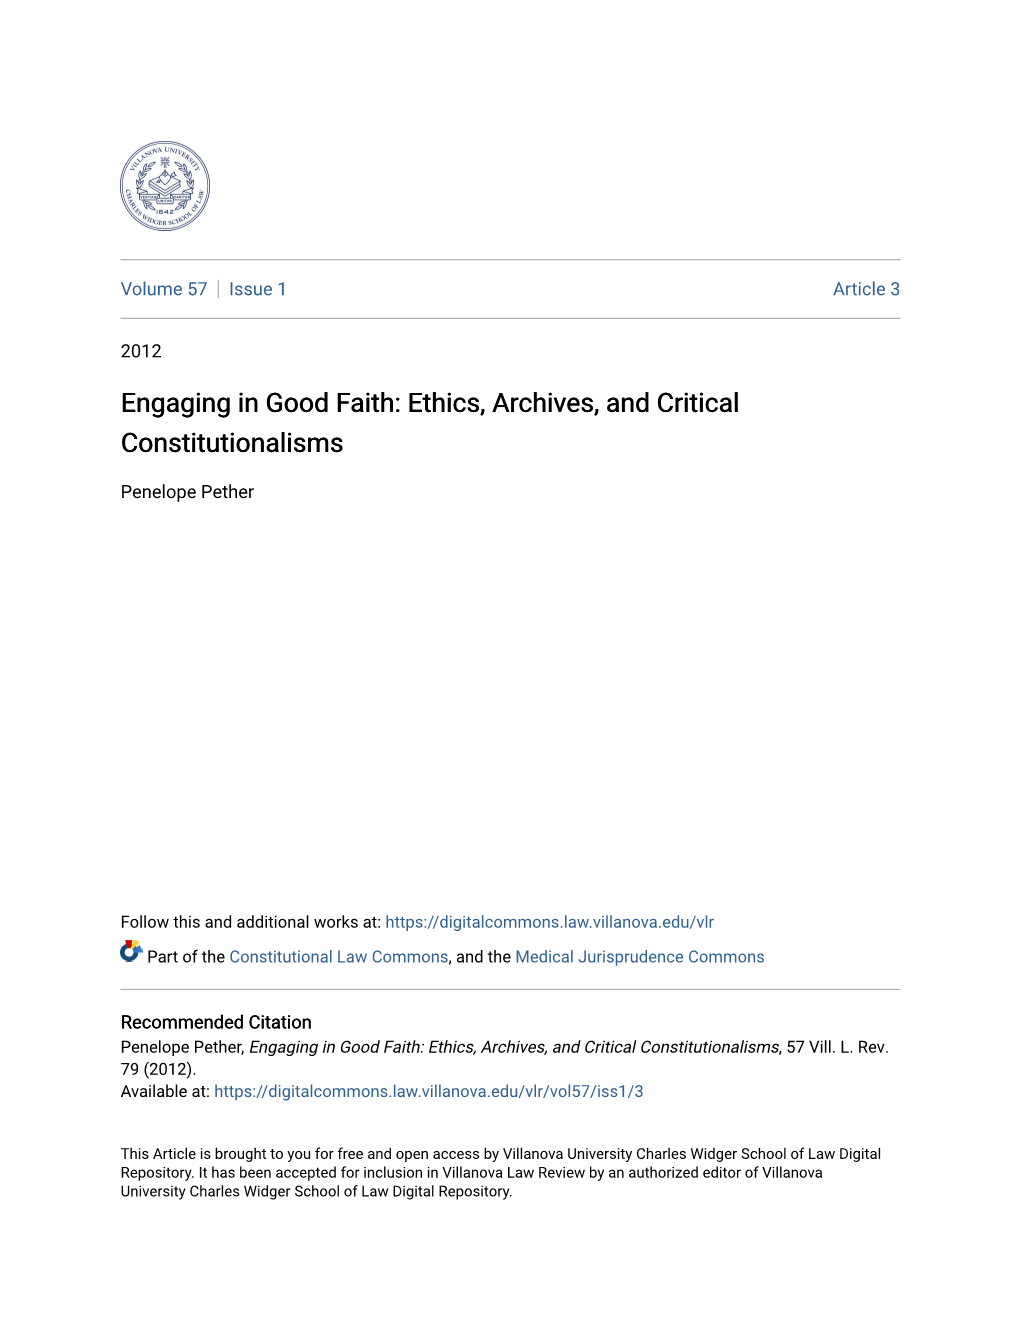 Engaging in Good Faith: Ethics, Archives, and Critical Constitutionalisms